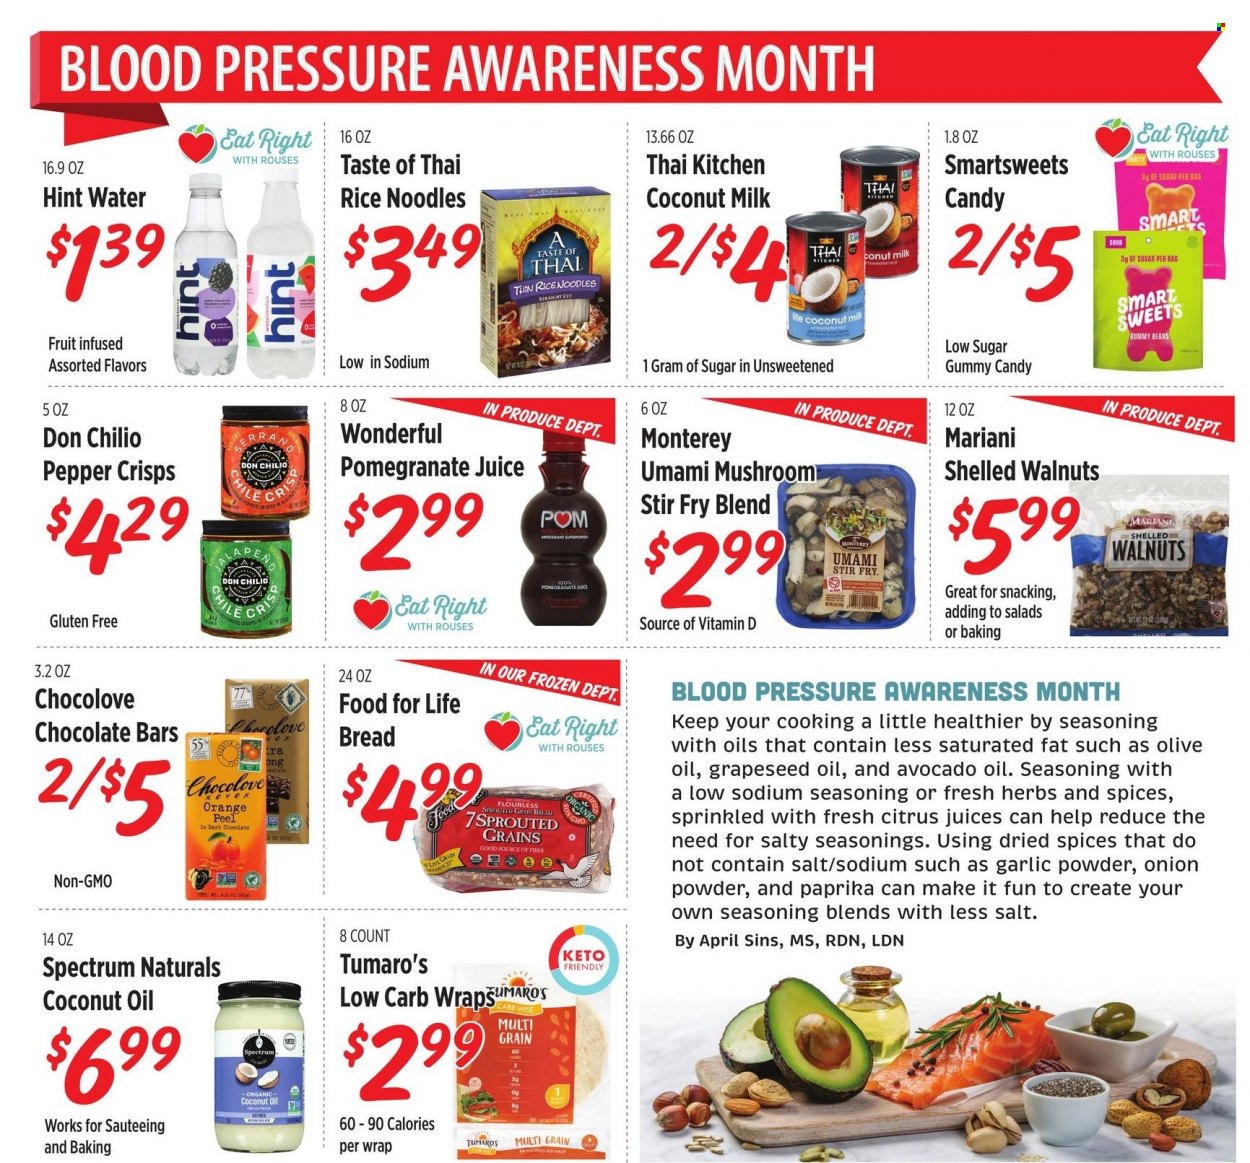 thumbnail - Rouses Markets Flyer - 04/27/2022 - 05/25/2022 - Sales products - bread, oranges, noodles, dark chocolate, chocolate bar, salt, coconut milk, rice vermicelli, pepper, spice, herbs, garlic powder, onion powder, coconut oil, grape seed oil, walnuts, juice, Spectrum, pomegranate. Page 4.